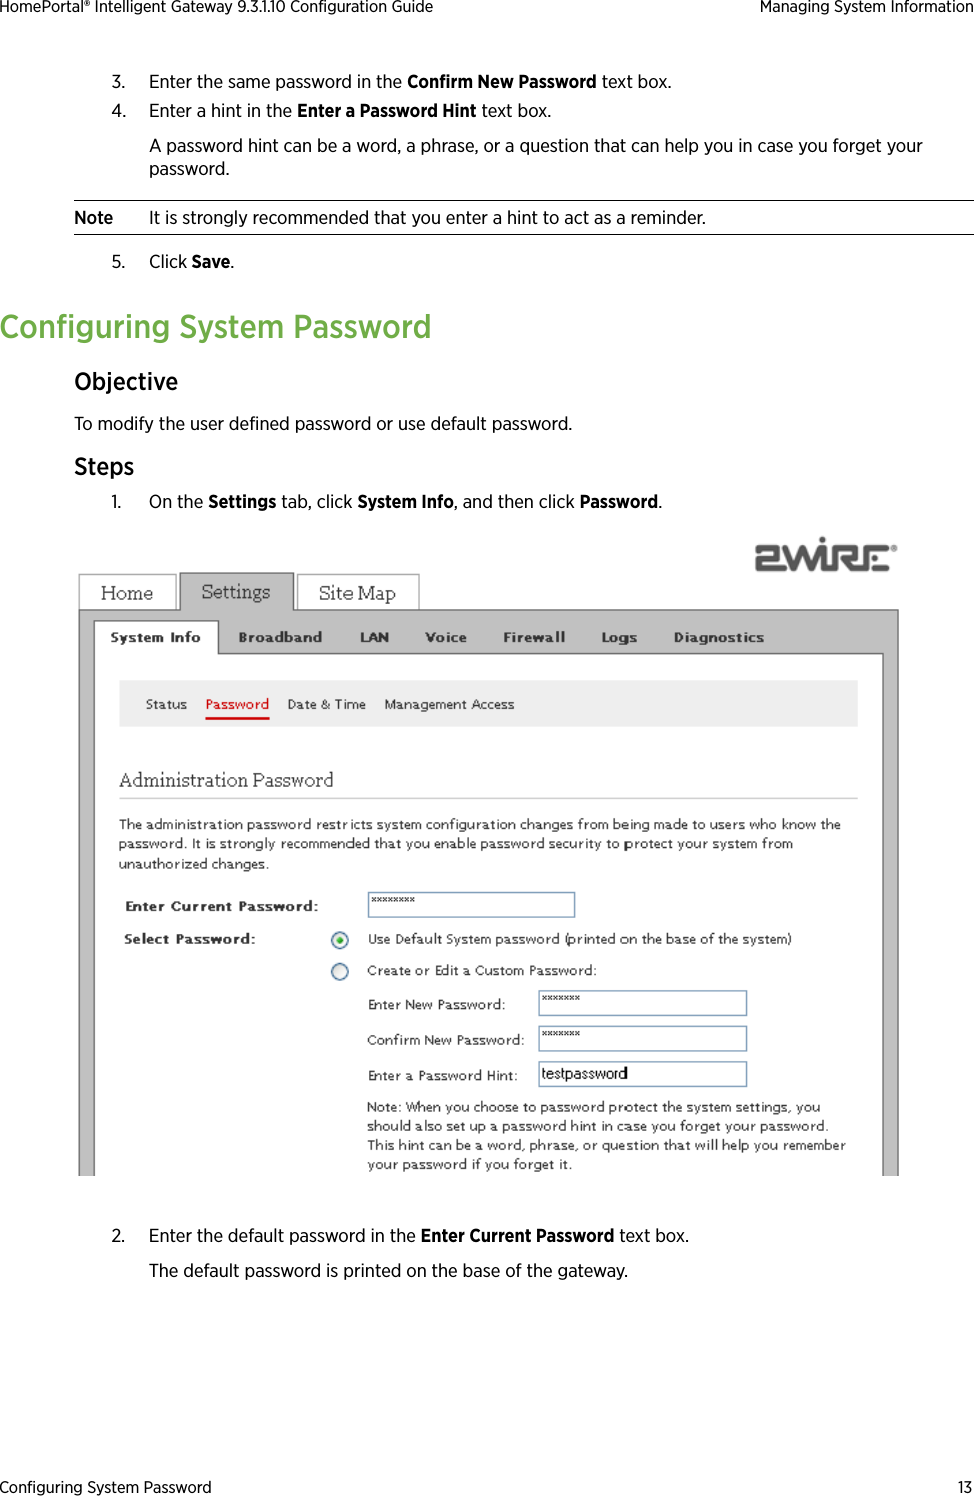 Configuring System Password 13HomePortal® Intelligent Gateway 9.3.1.10 Configuration Guide Managing System Information3. Enter the same password in the Confirm New Password text box.4. Enter a hint in the Enter a Password Hint text box. A password hint can be a word, a phrase, or a question that can help you in case you forget your password.Note It is strongly recommended that you enter a hint to act as a reminder.5. Click Save.Configuring System PasswordObjectiveTo modify the user defined password or use default password.Steps1. On the Settings tab, click System Info, and then click Password.2. Enter the default password in the Enter Current Password text box.The default password is printed on the base of the gateway.